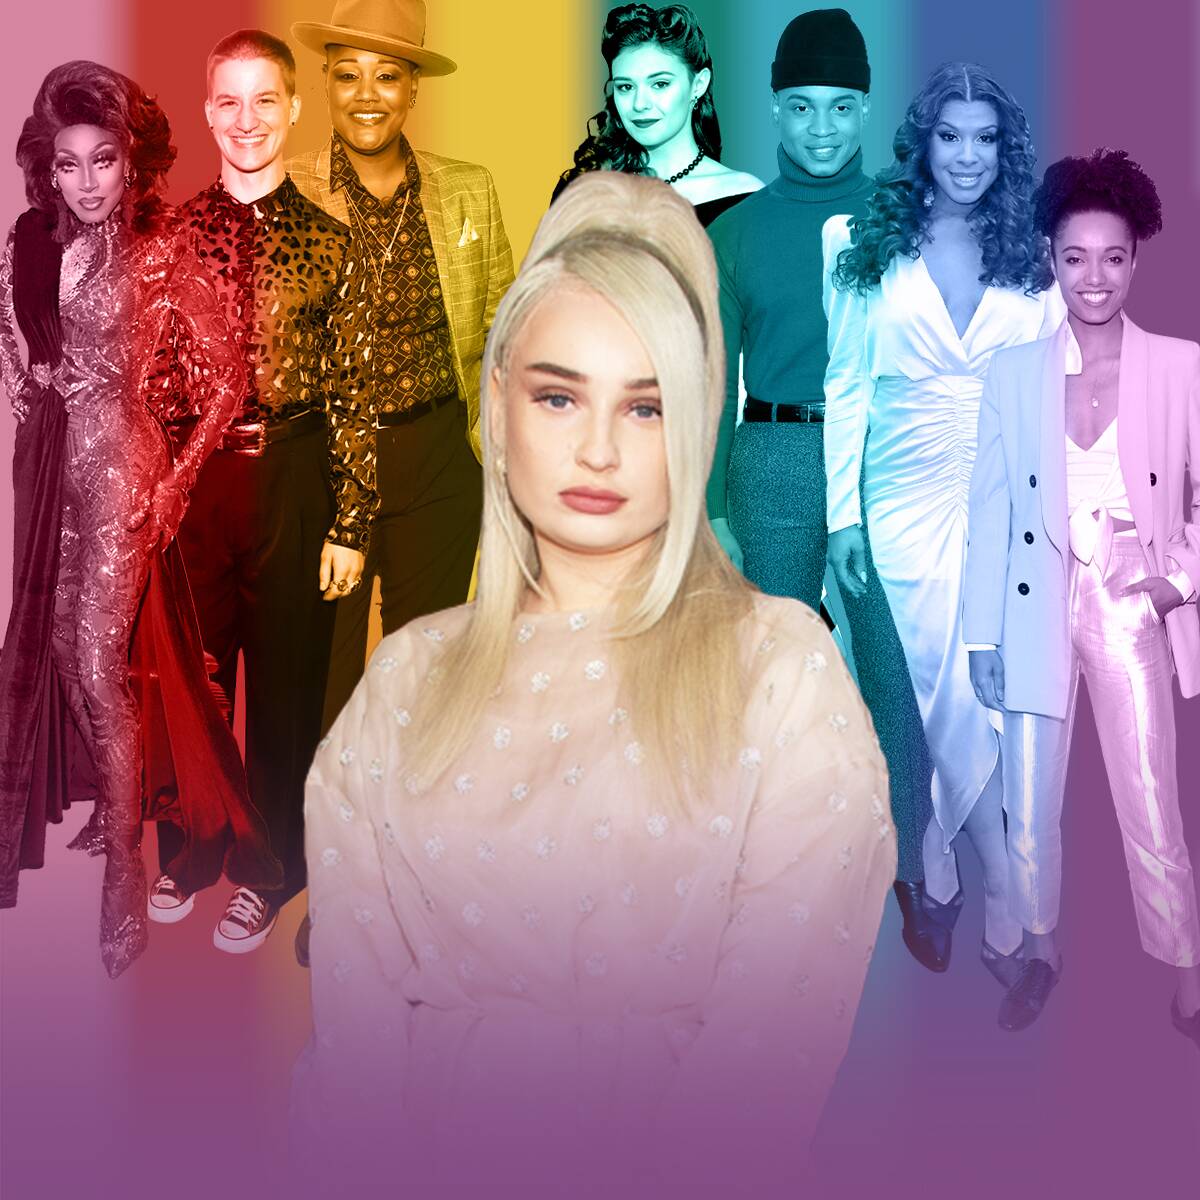 The New Faces of Pride: Kim Petras on Meeting Madonna, the Importance of Intersectionality and More